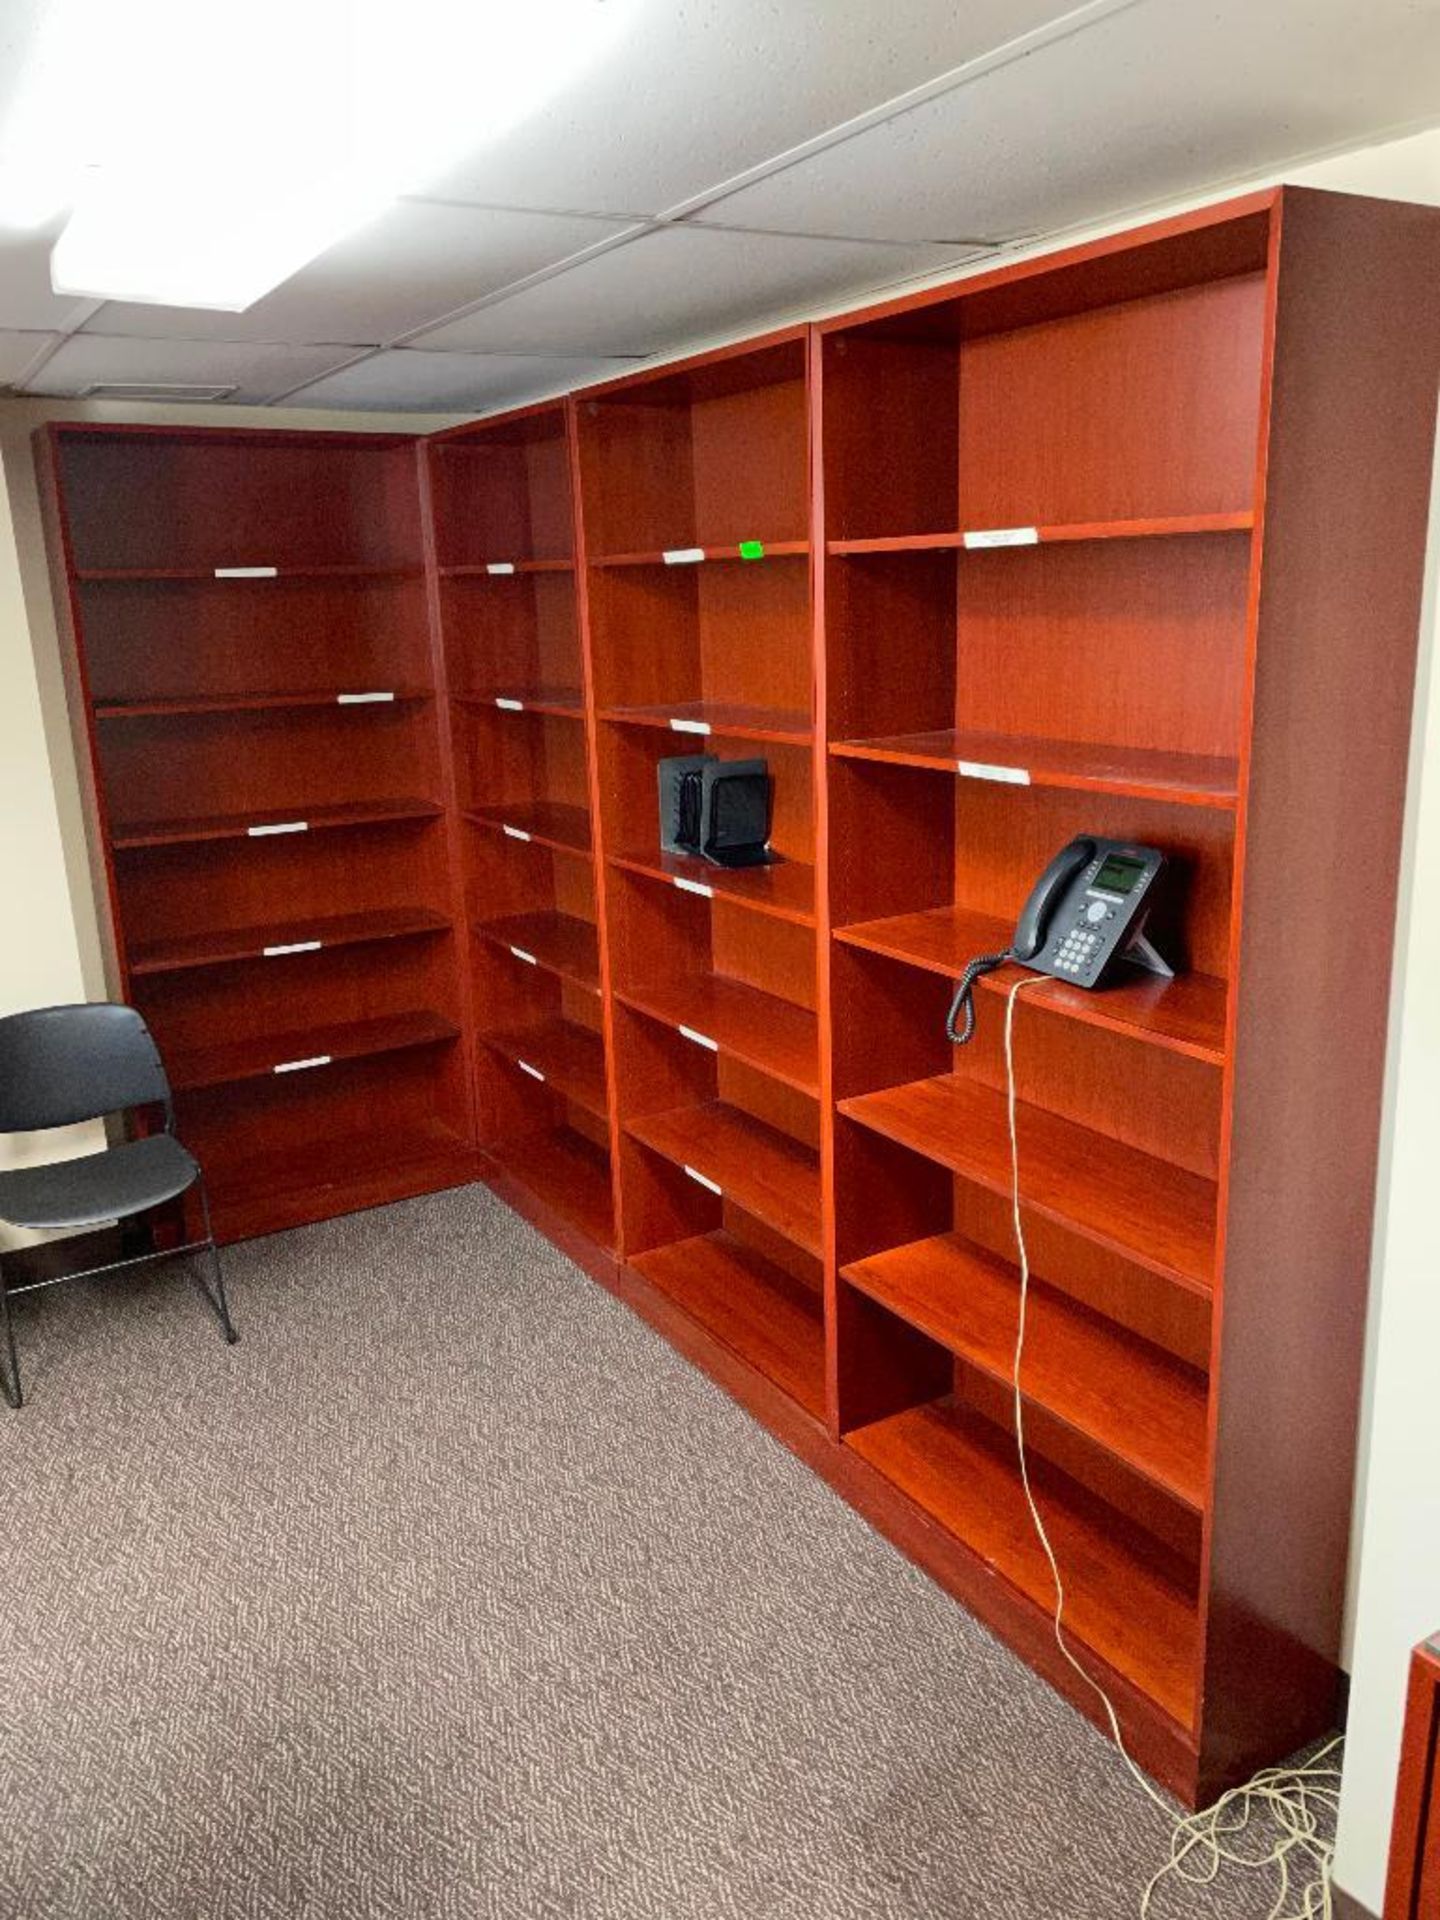 DESCRIPTION: (4) - 8 FT. BOOK SHELVES WITH ADDITIONAL MATCHING CABINETS ADDITIONAL INFORMATION: SEE